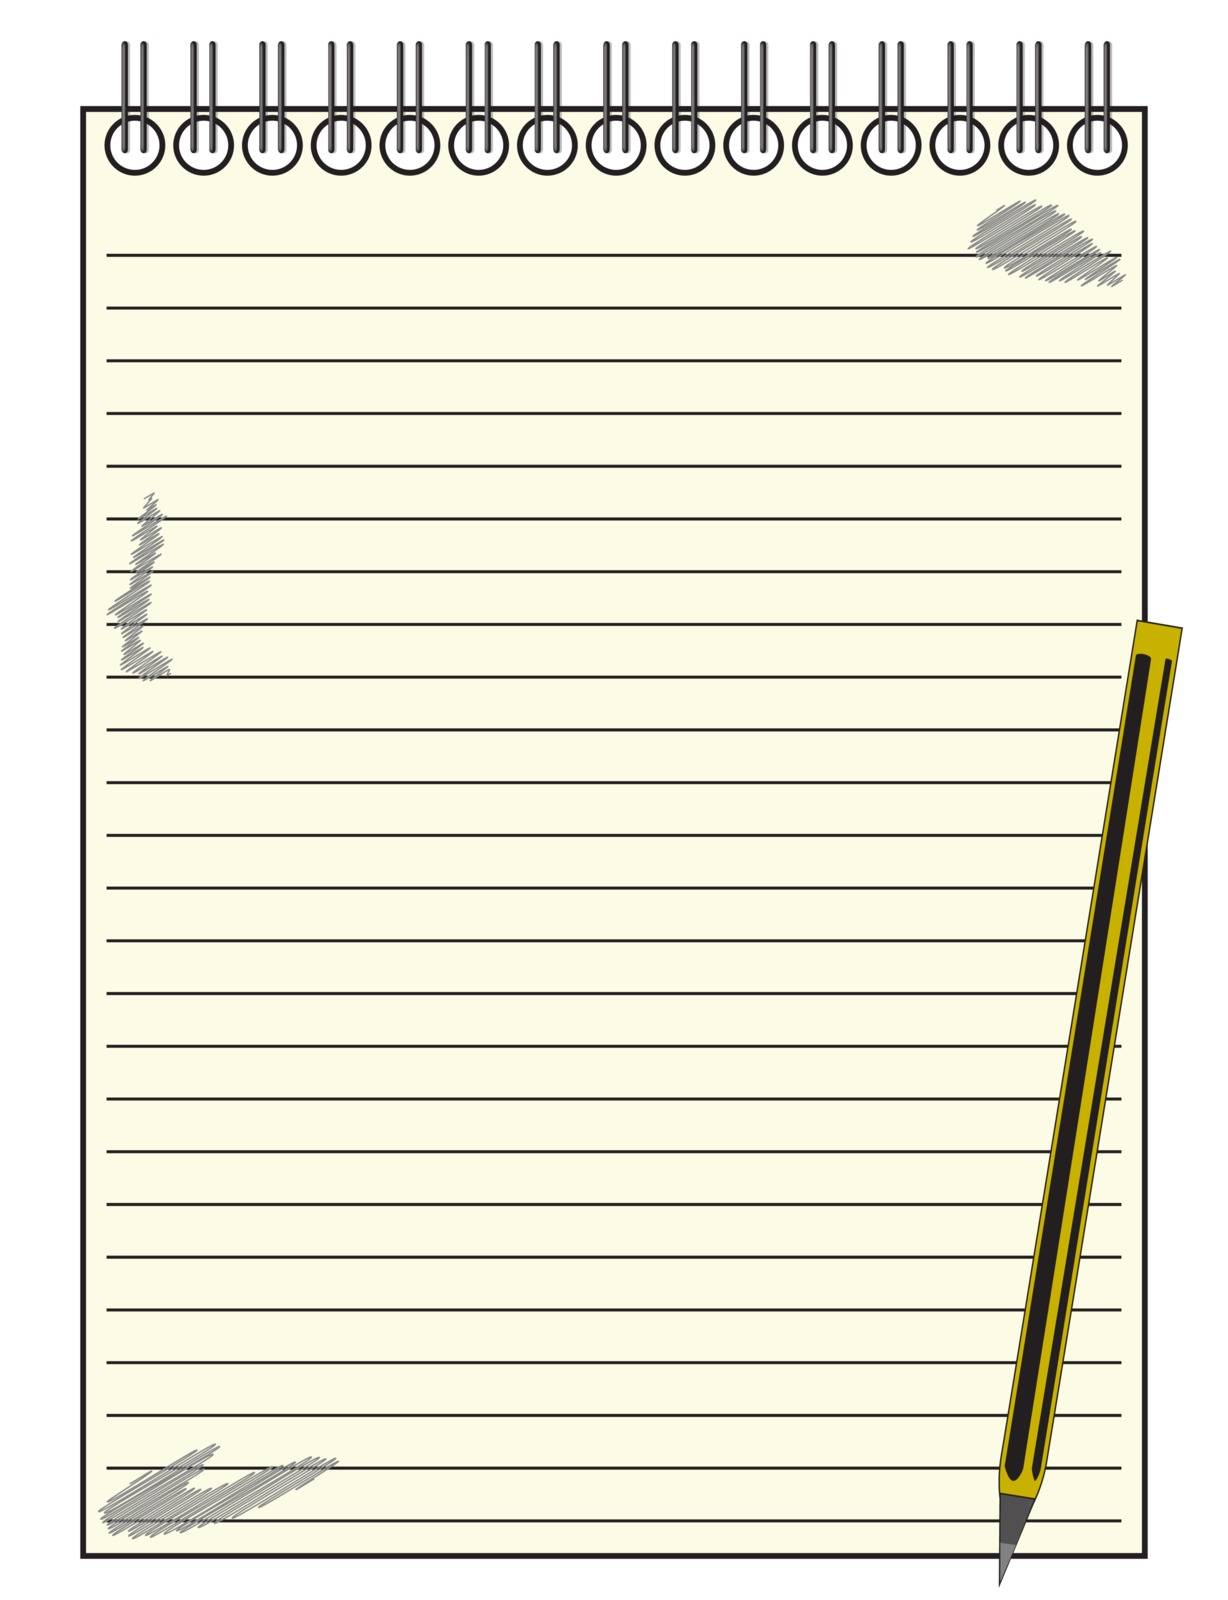 A lined reporter's blank notepad template or background with a pencil isolated on a white background